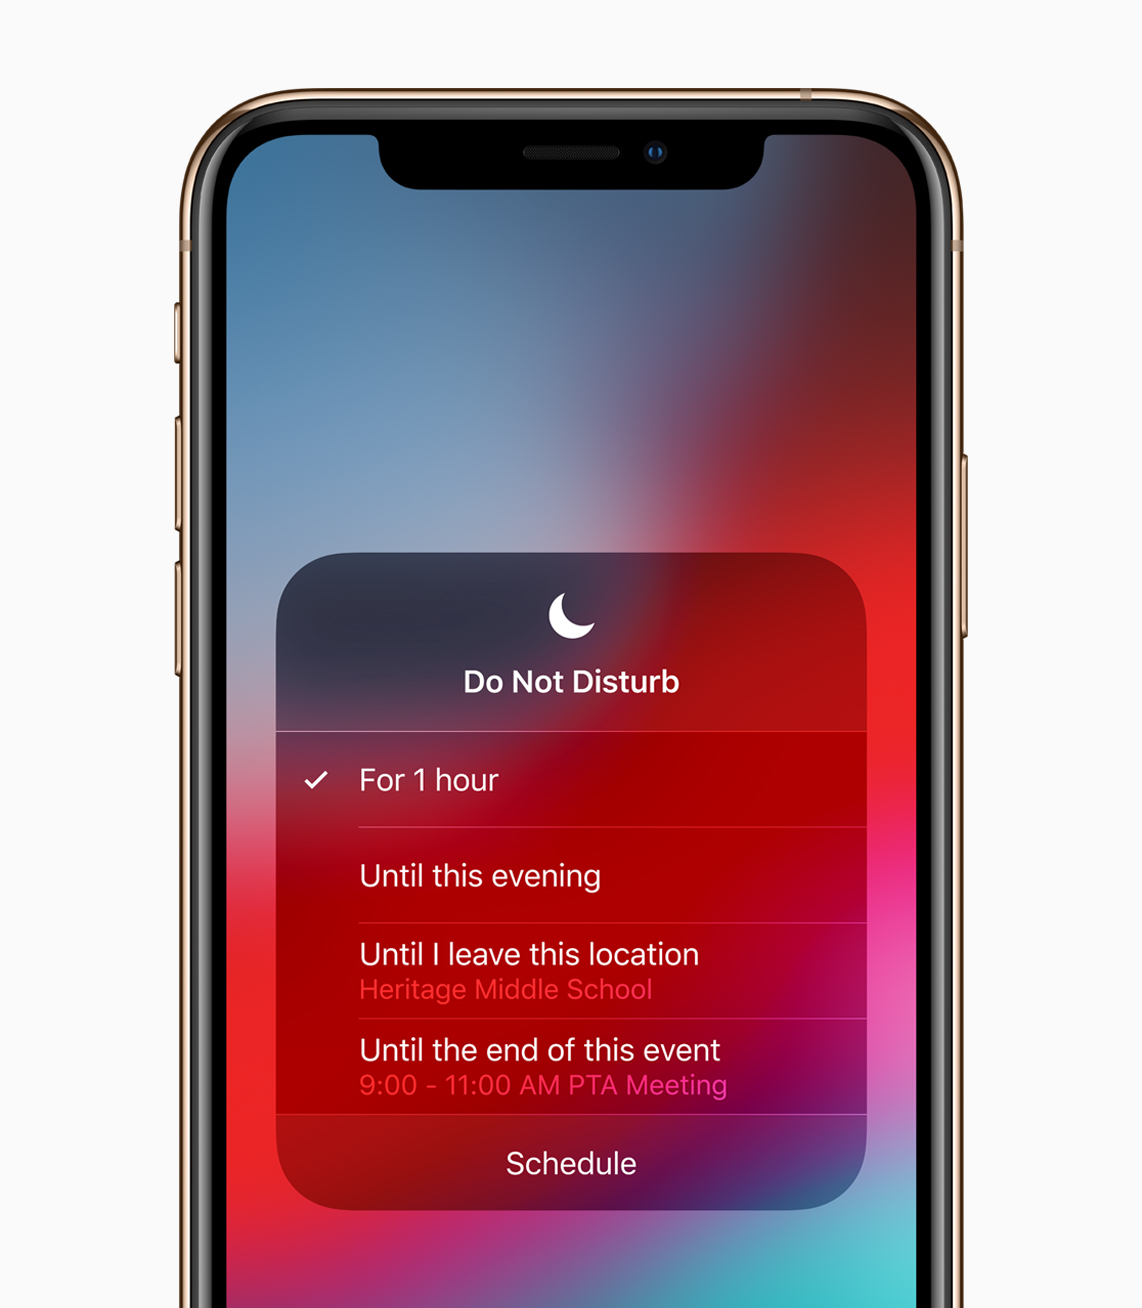 Apple Officially Releases iOS 12 for iPhone, iPad, iPod touch [Download]